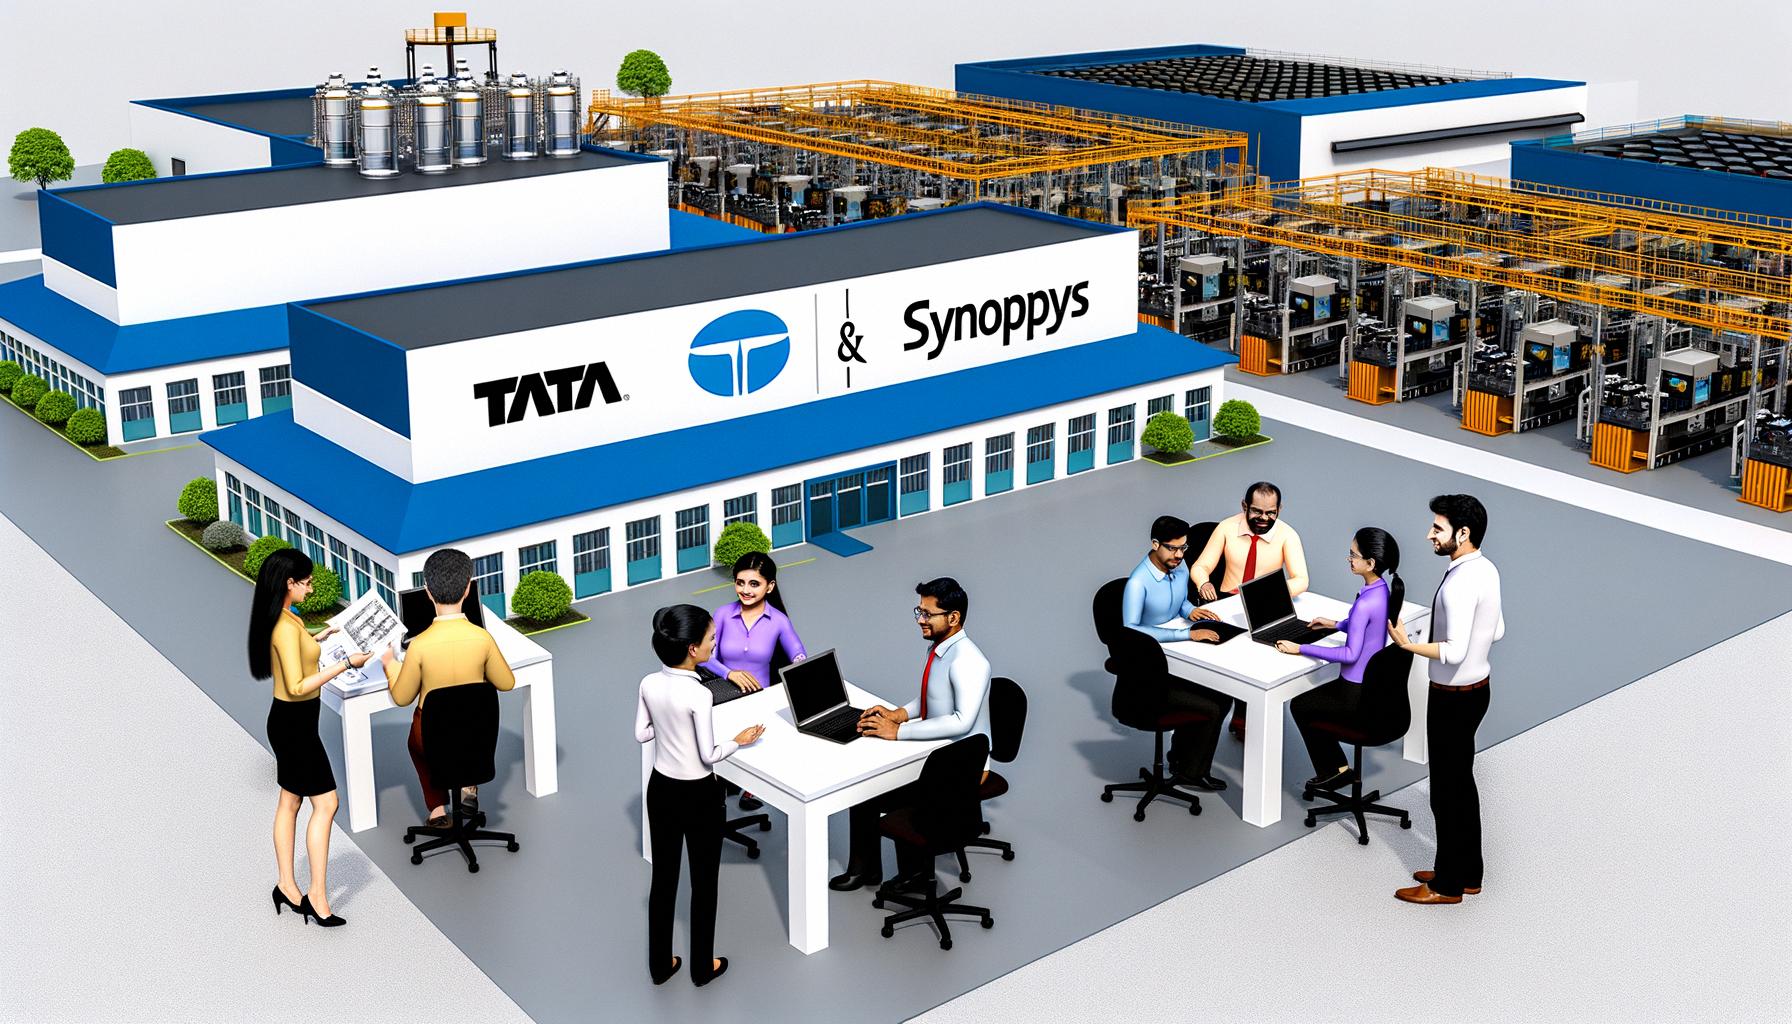 Tata and Synopsys advance India's semiconductor and AI manufacturing capacity.